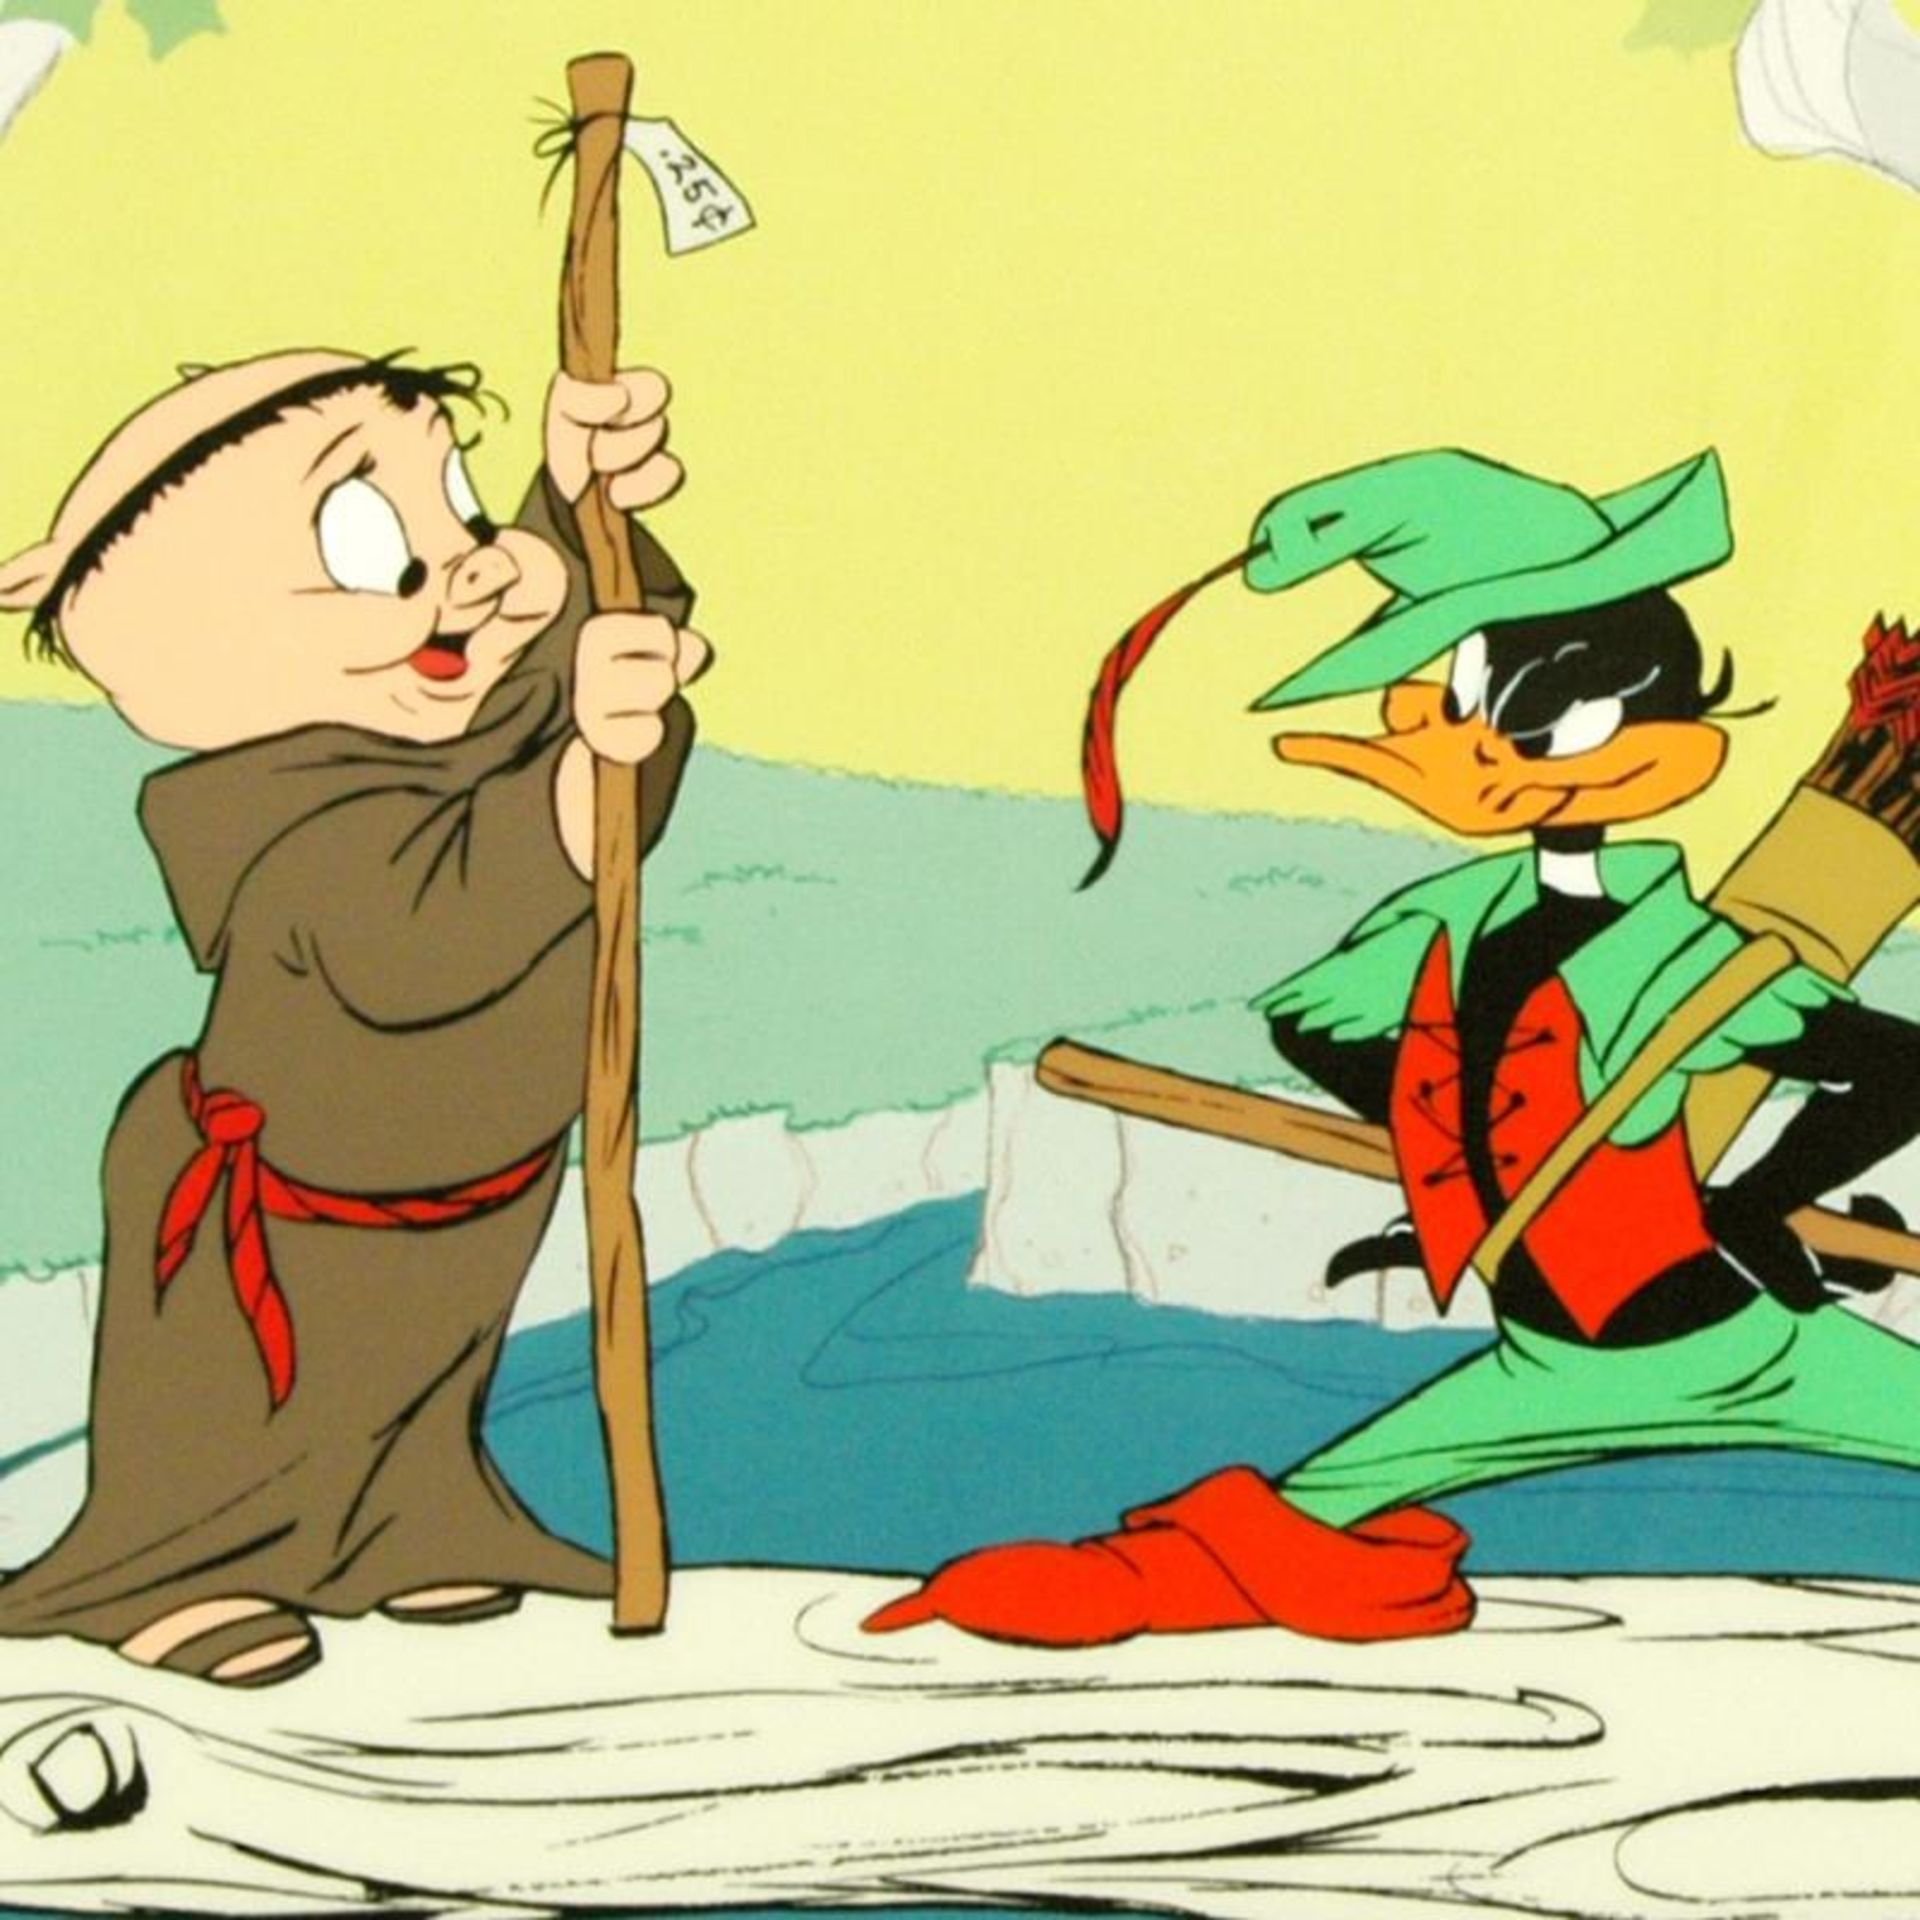 Buck and a Quarter Staff by Chuck Jones (1912-2002) - Image 2 of 2